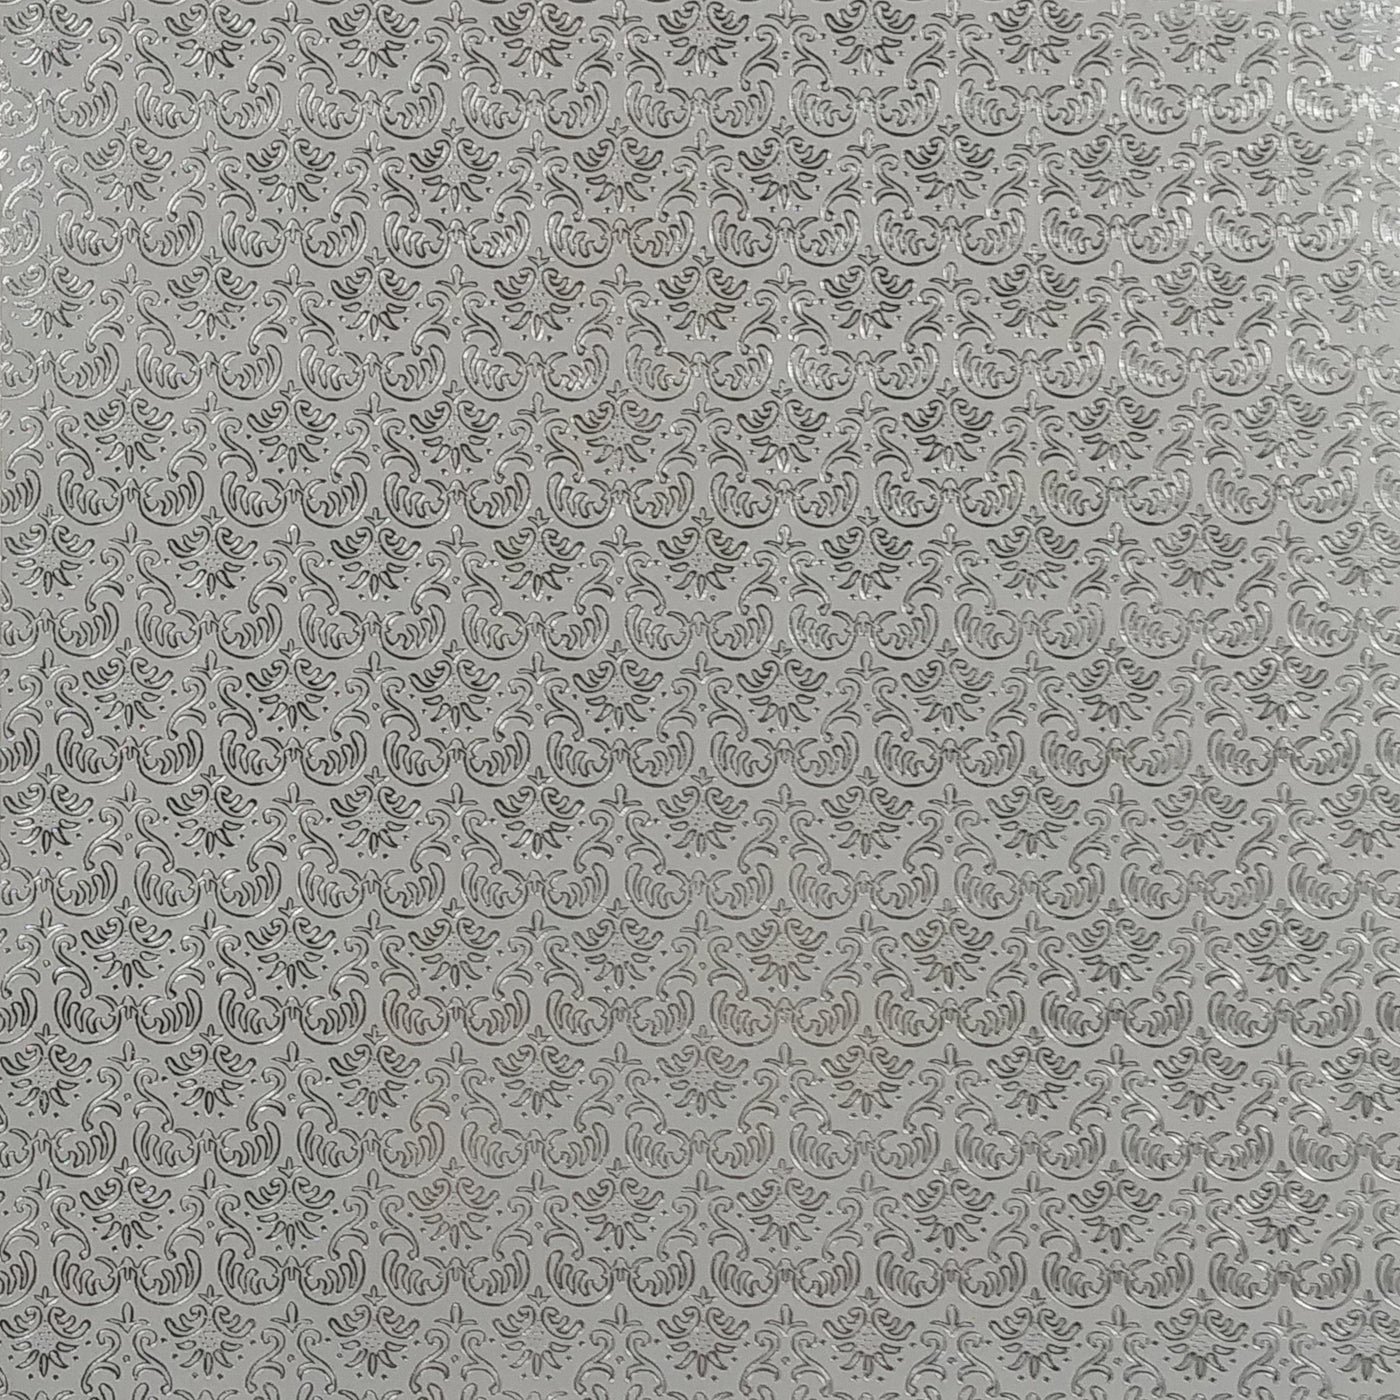 12x12 cardstock with intricate silver foil design on gray background - AC Specialty